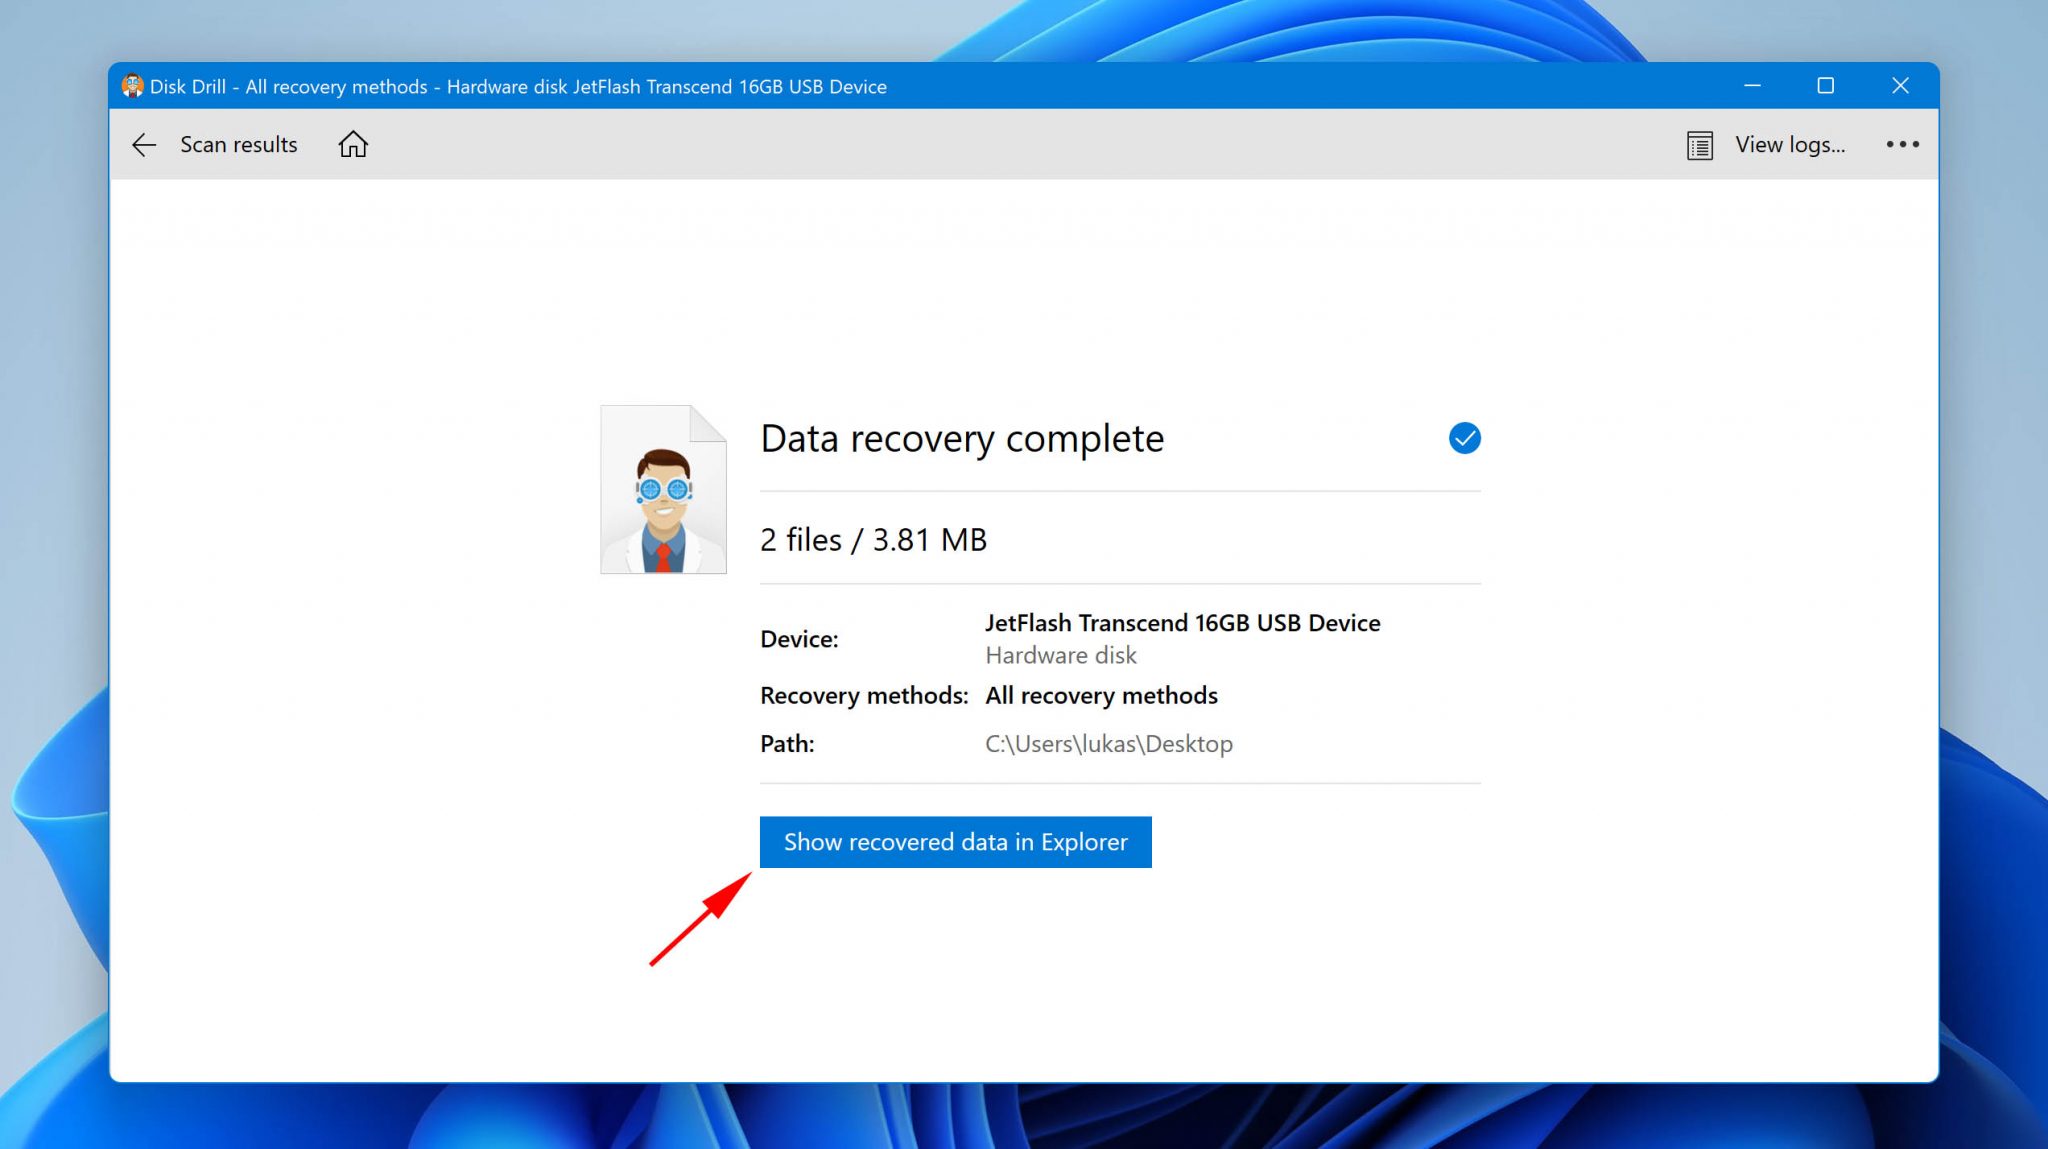 click on Show recovered data in Explorer